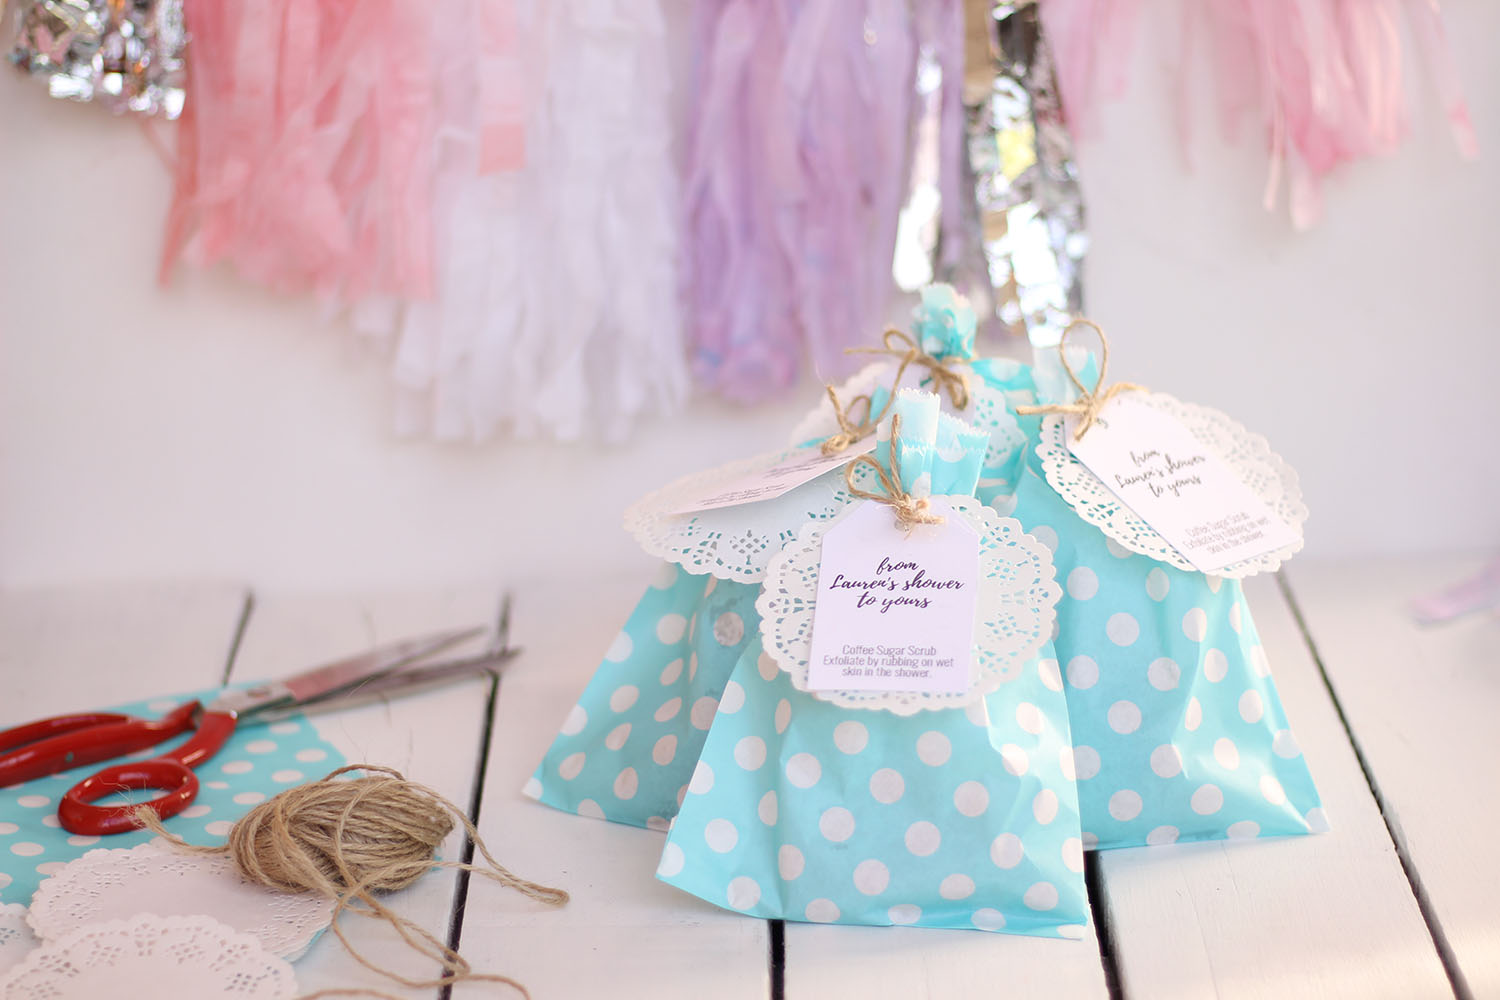 Easy peasy bridal shower favours with a DIY sugar scrub - from her shower to yours